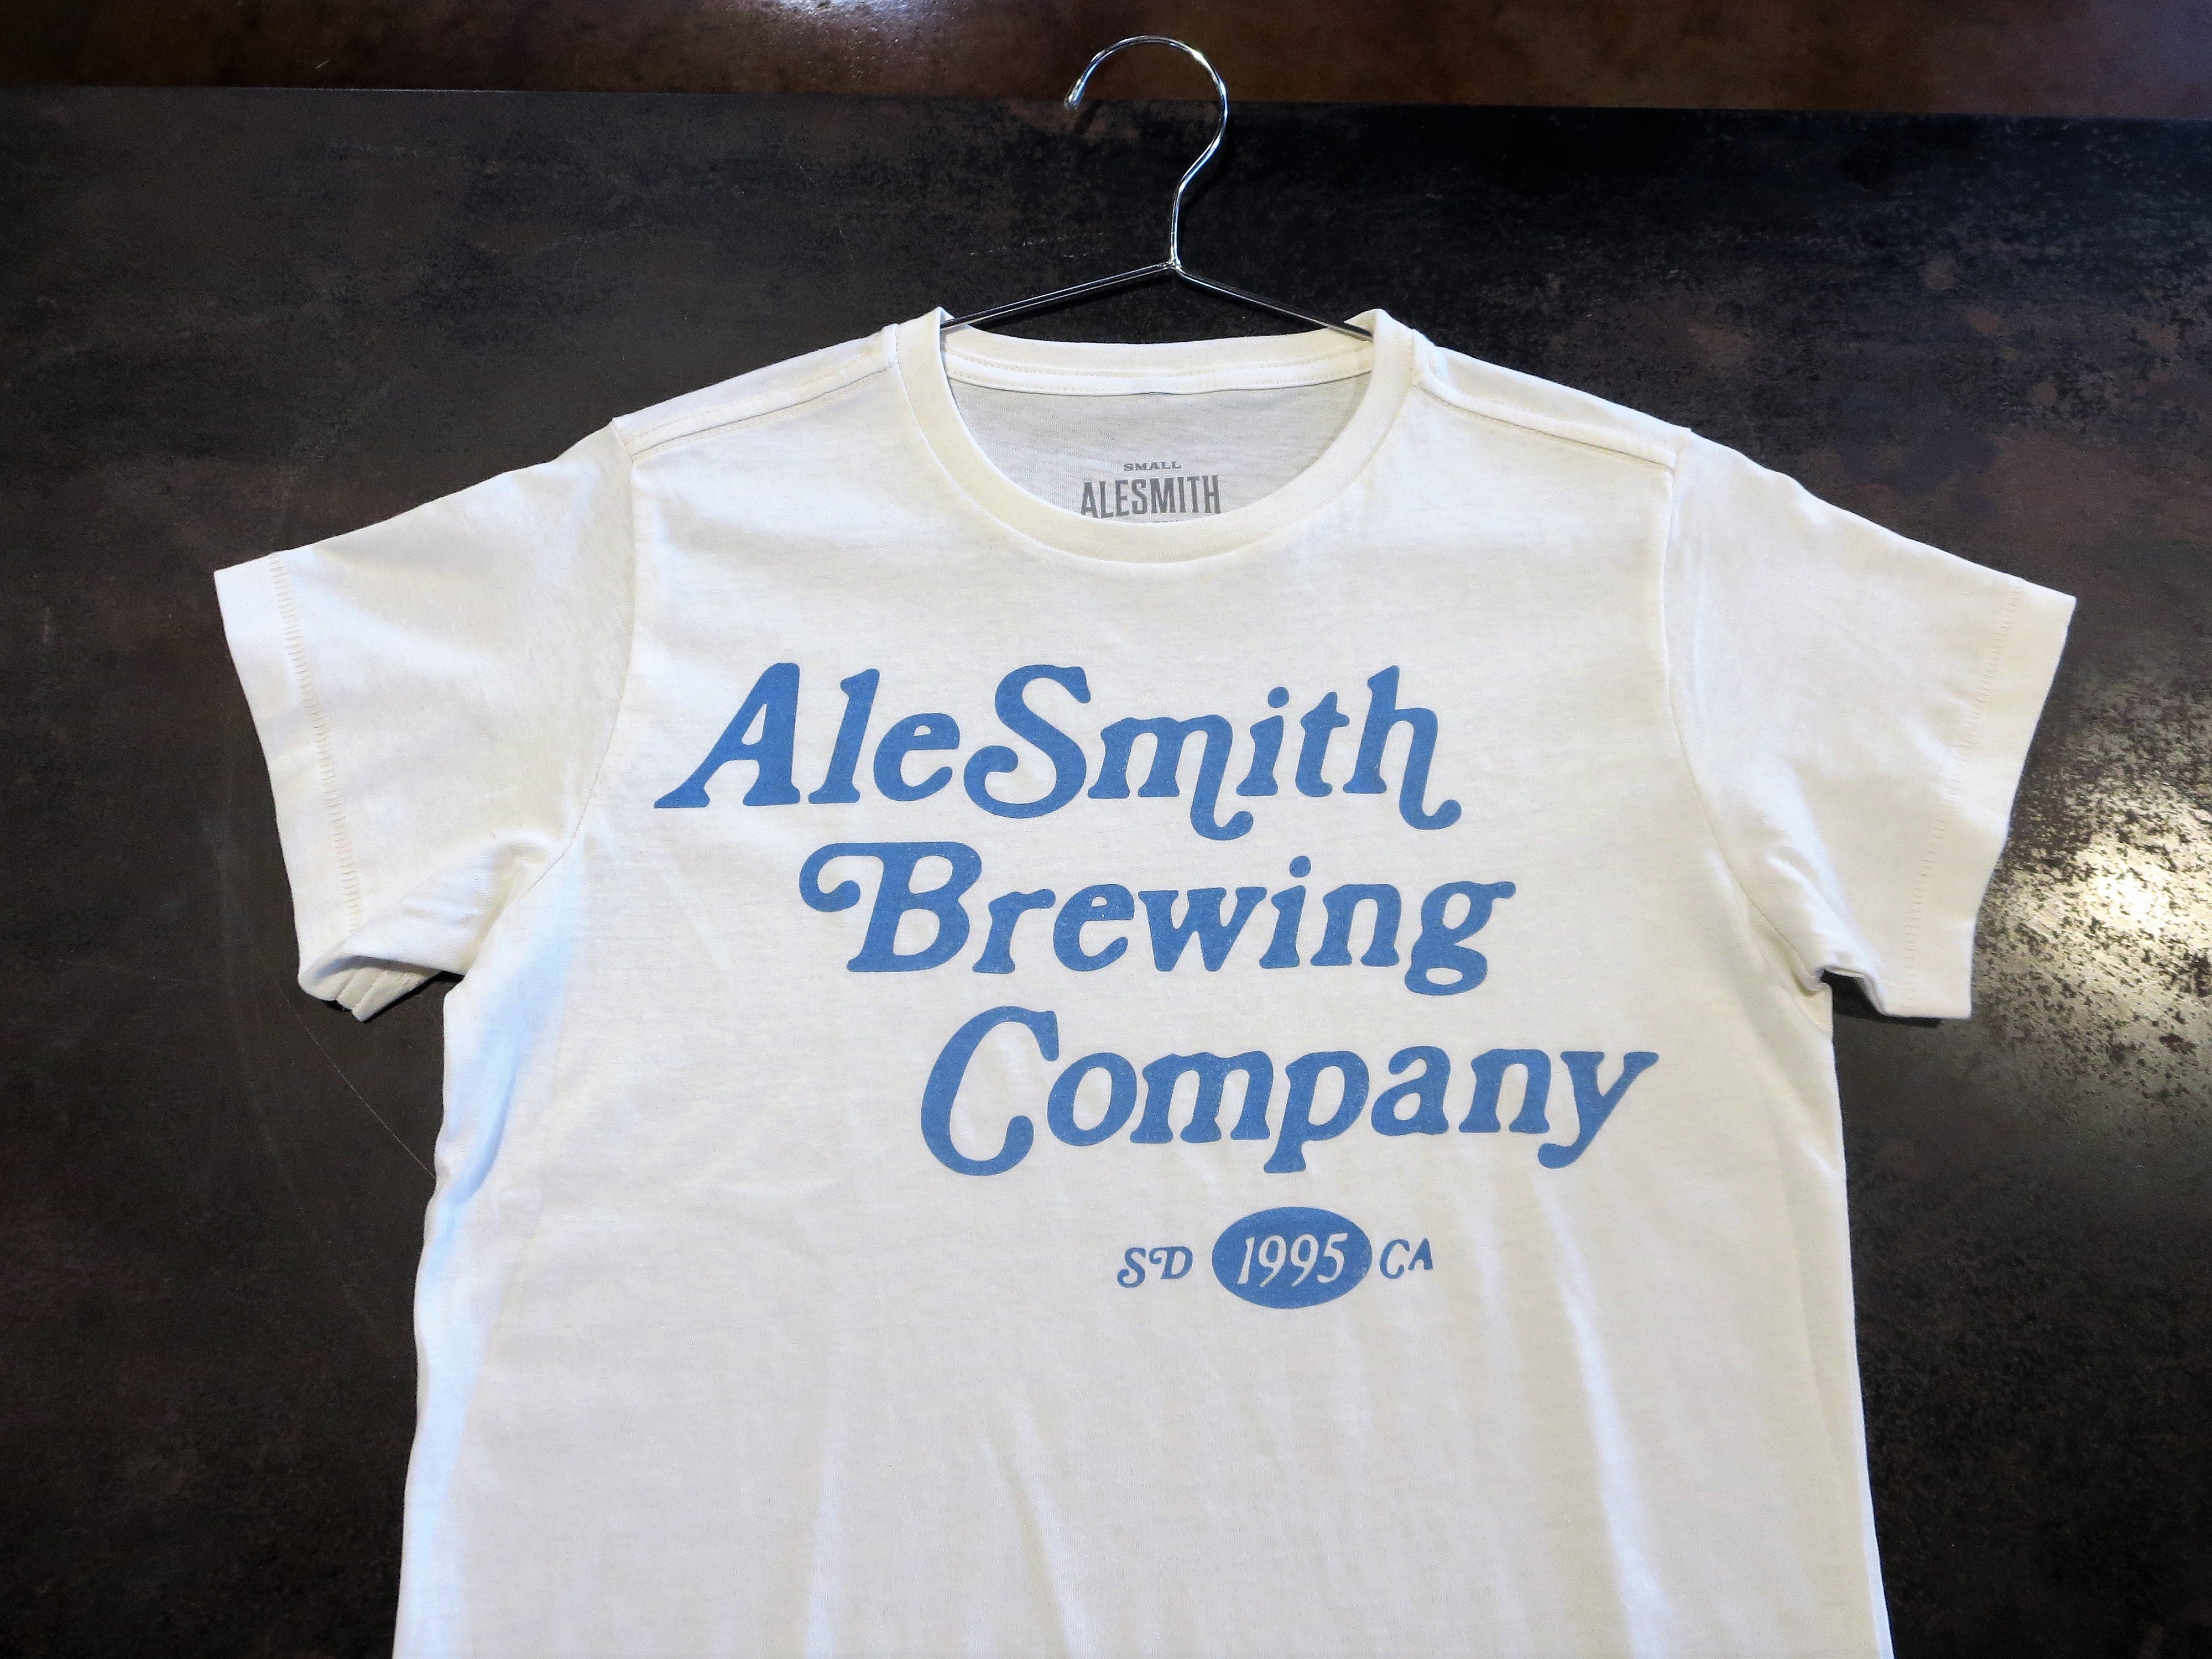 Women's Cheers Tee - Vintage White / Blue - AleSmith Brewing Co.